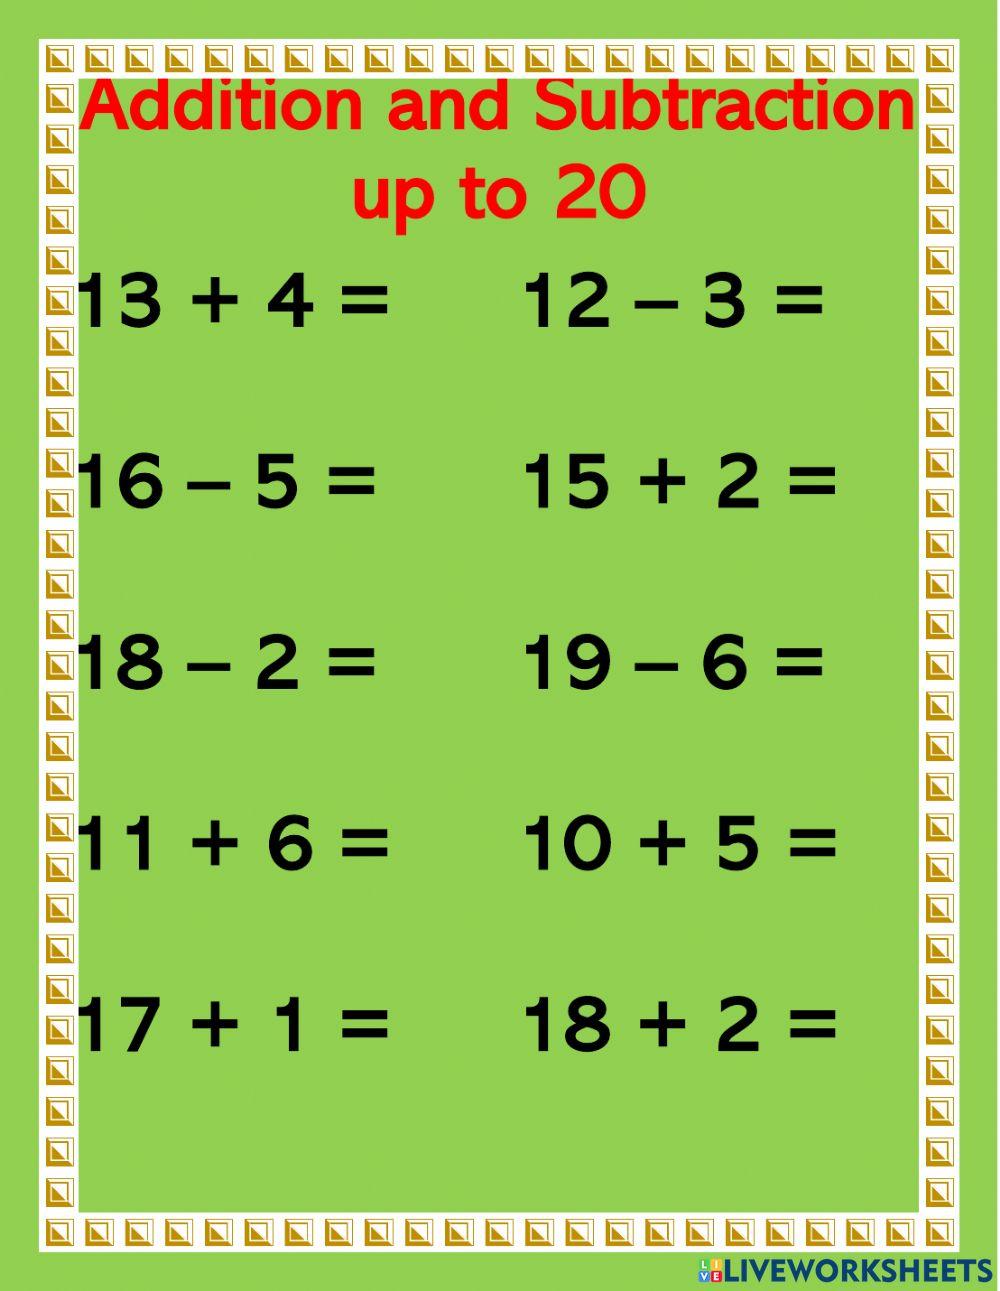 Addition and Subtraction to 20 Set 2